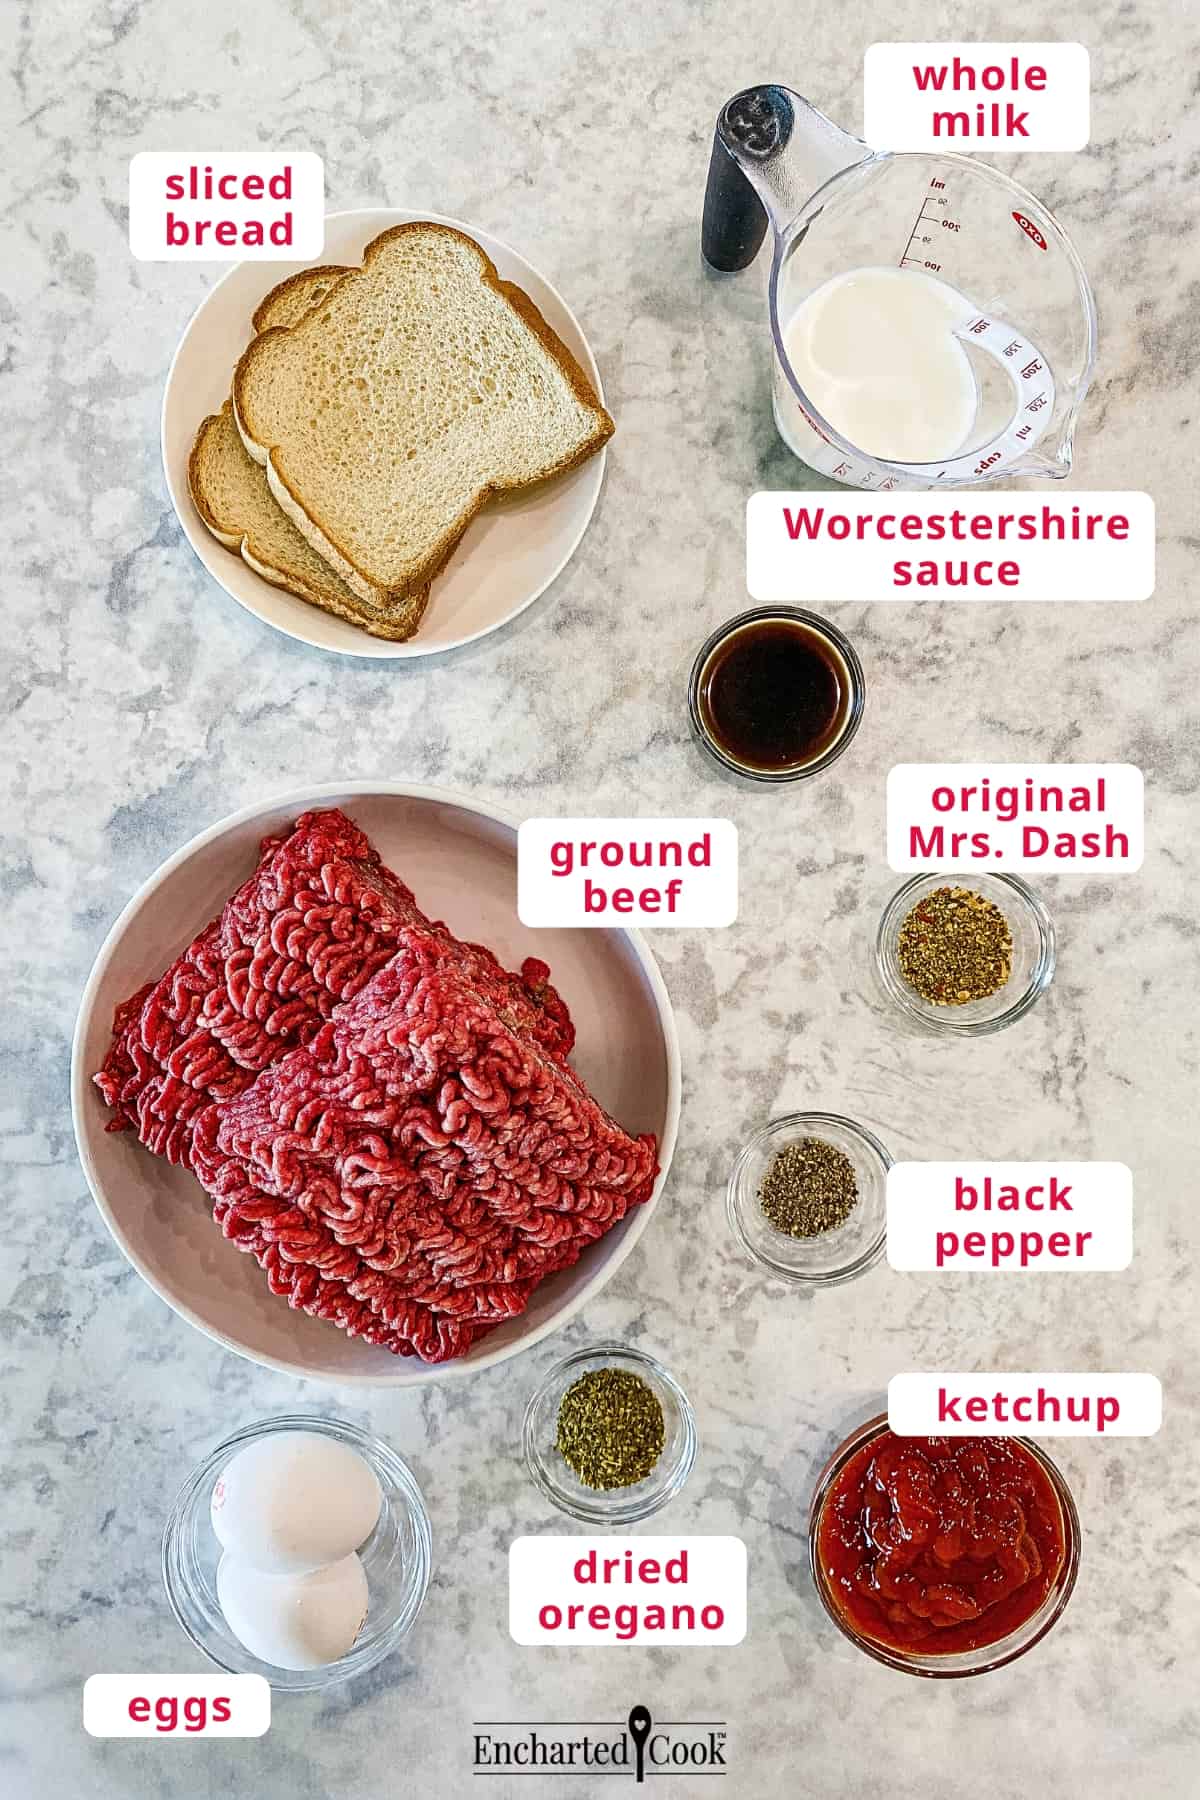 The ingredients, clockwise from top right: whole milk, Worcestershire sauce, original Mrs. Dash, black pepper, ketchup, dried oregano, eggs, ground beef, and sliced bread.